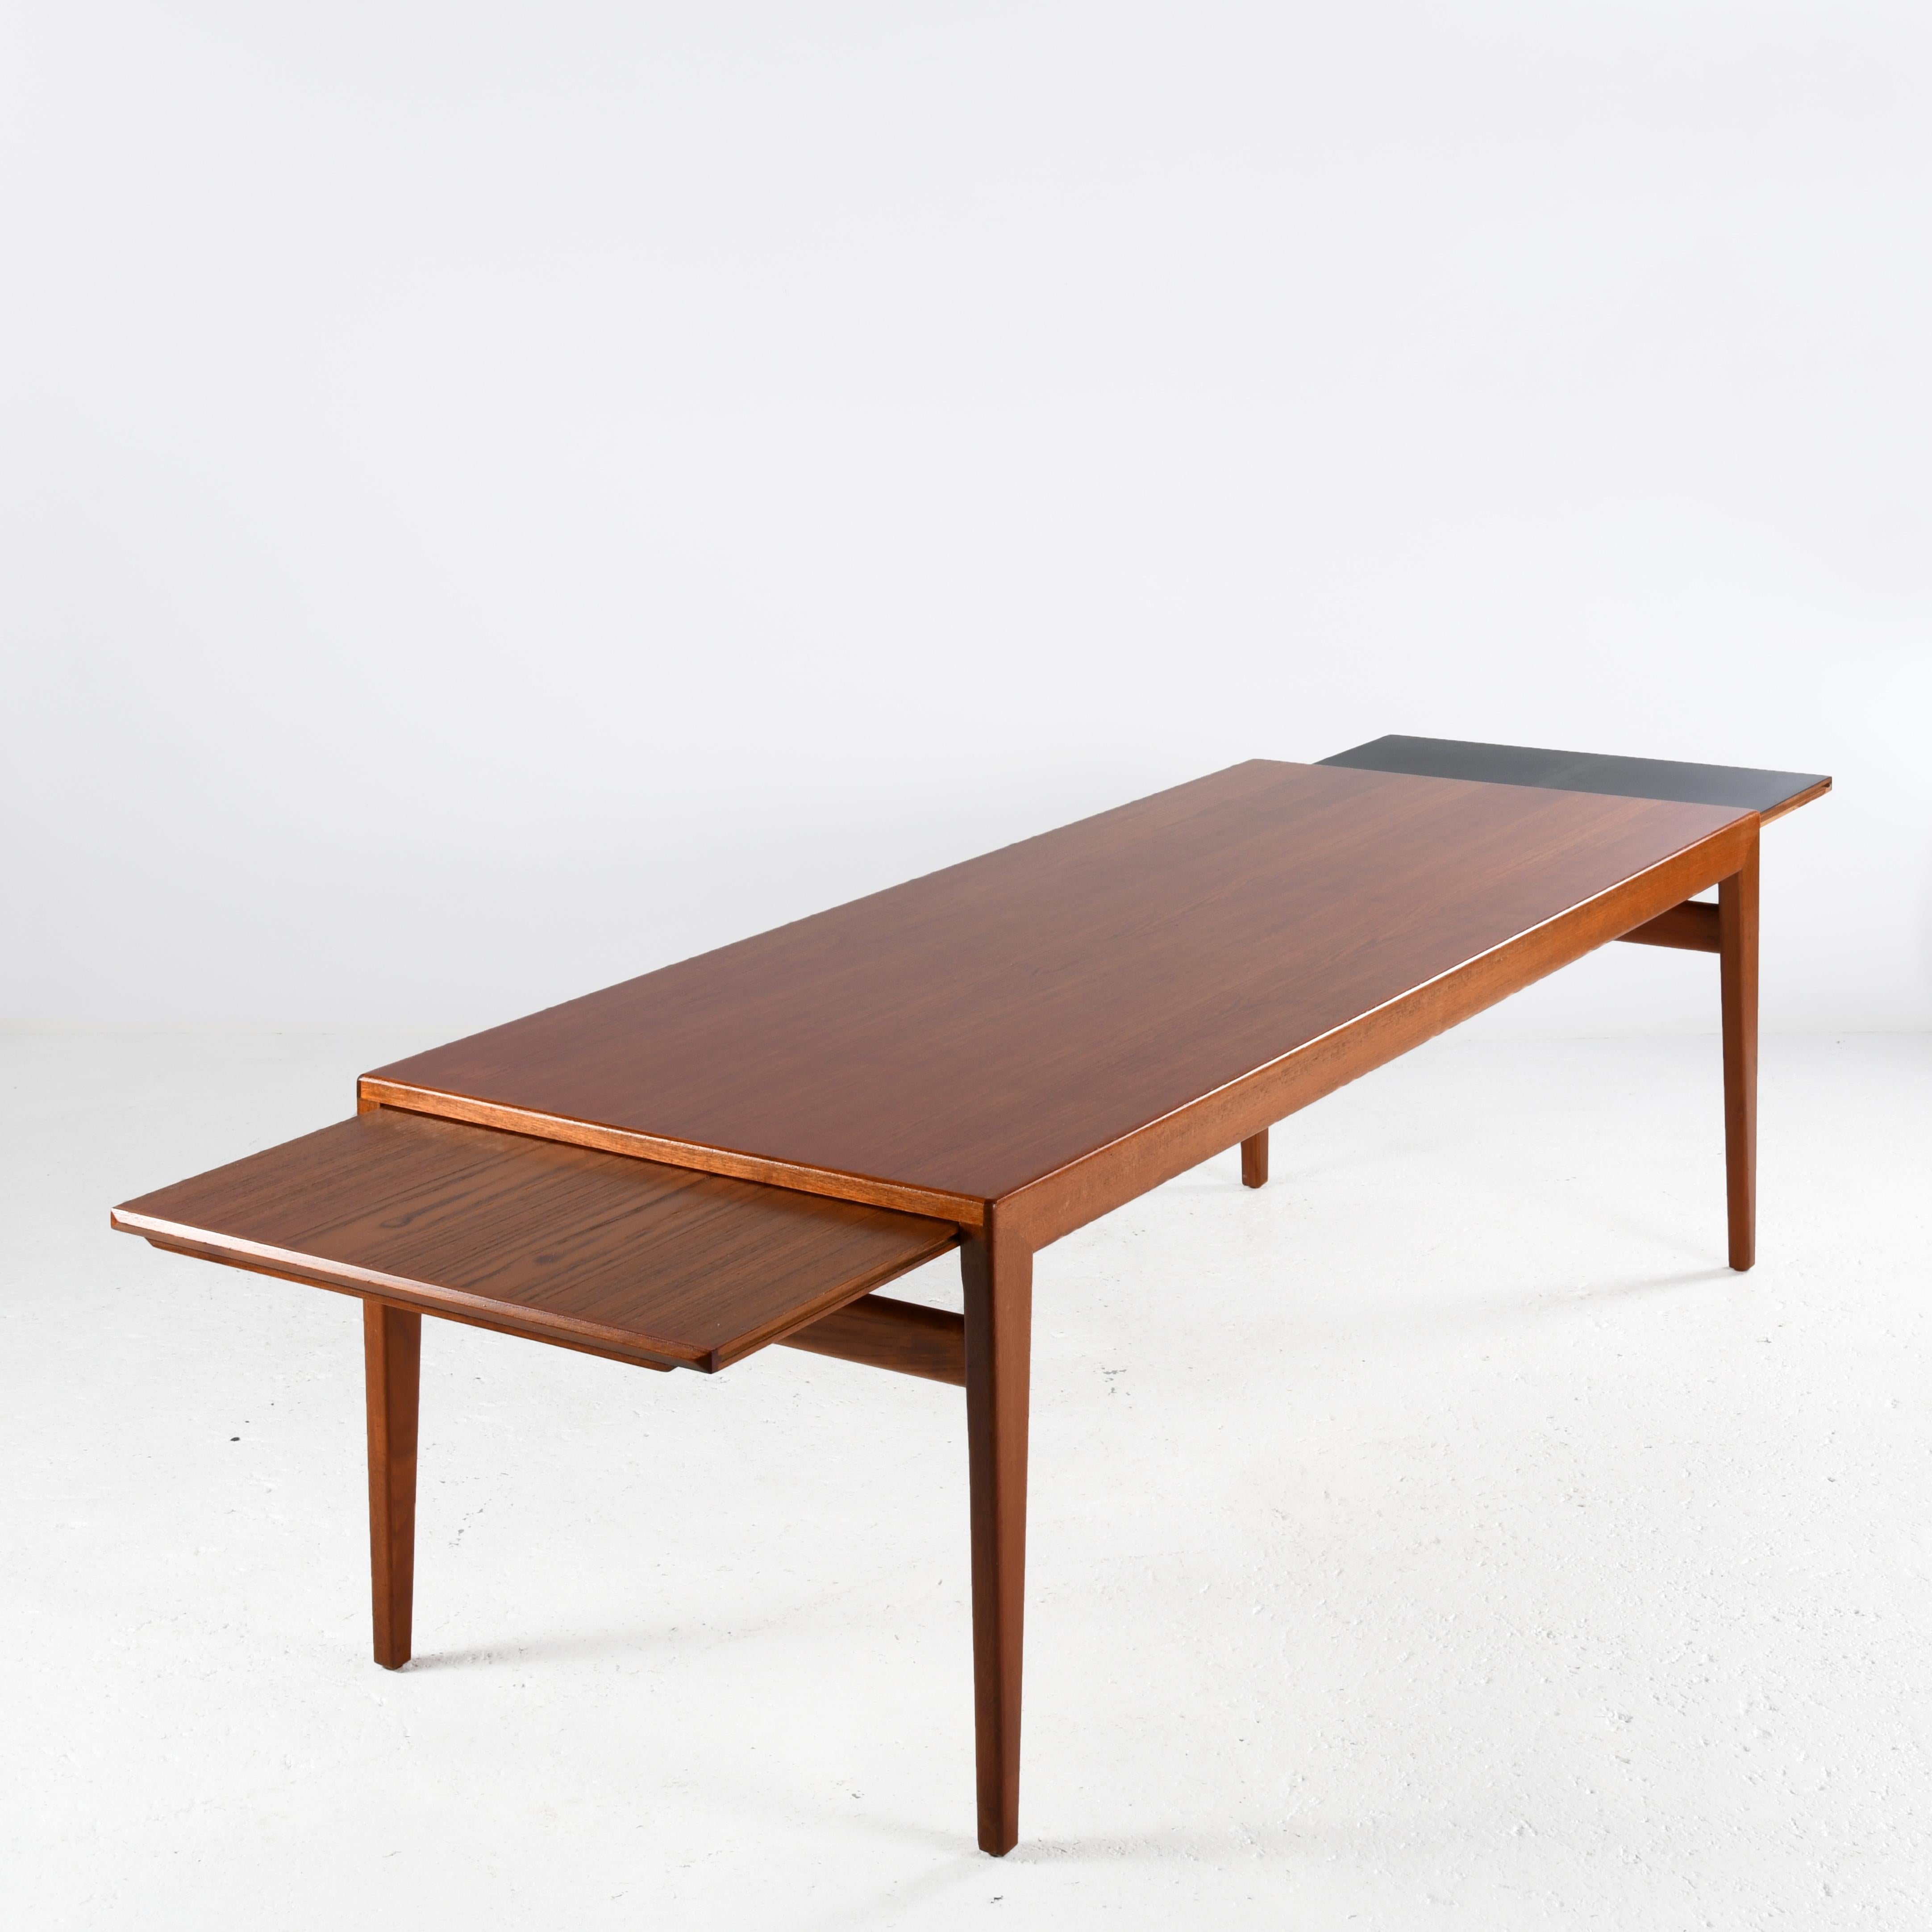 Large teak wood coffee table from the 1960s, designed by Johannes Andersen (1903-1991). Two retractable extensions under the top at either end, one in teak veneer, the other in black laminate veneer. The teak tops are protected by a satin varnish to